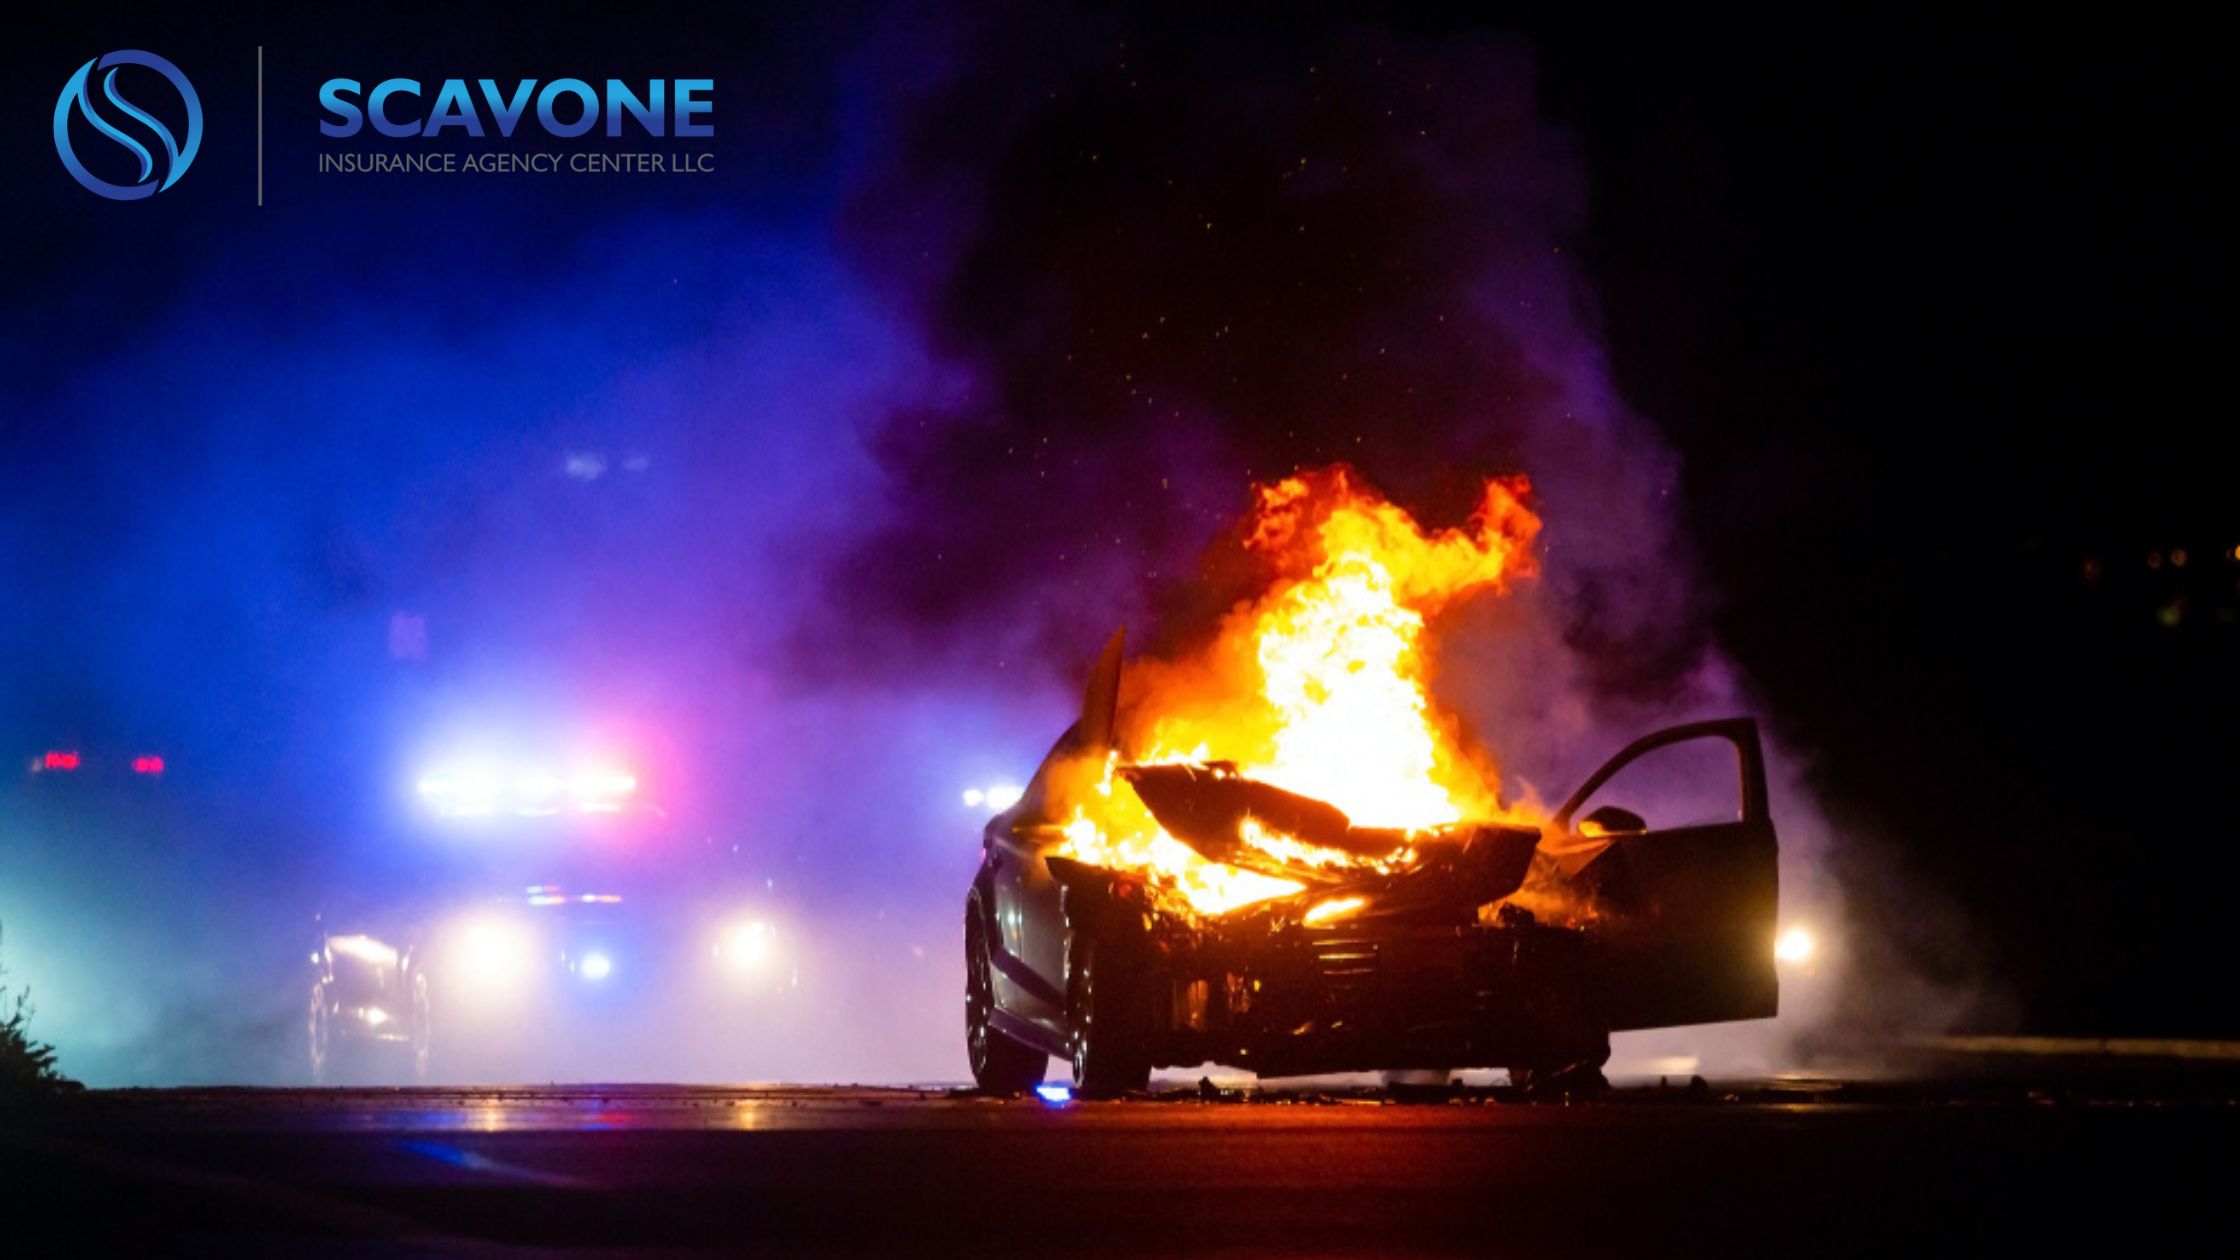 Car Insurance: Does It Cover Fire Damage?